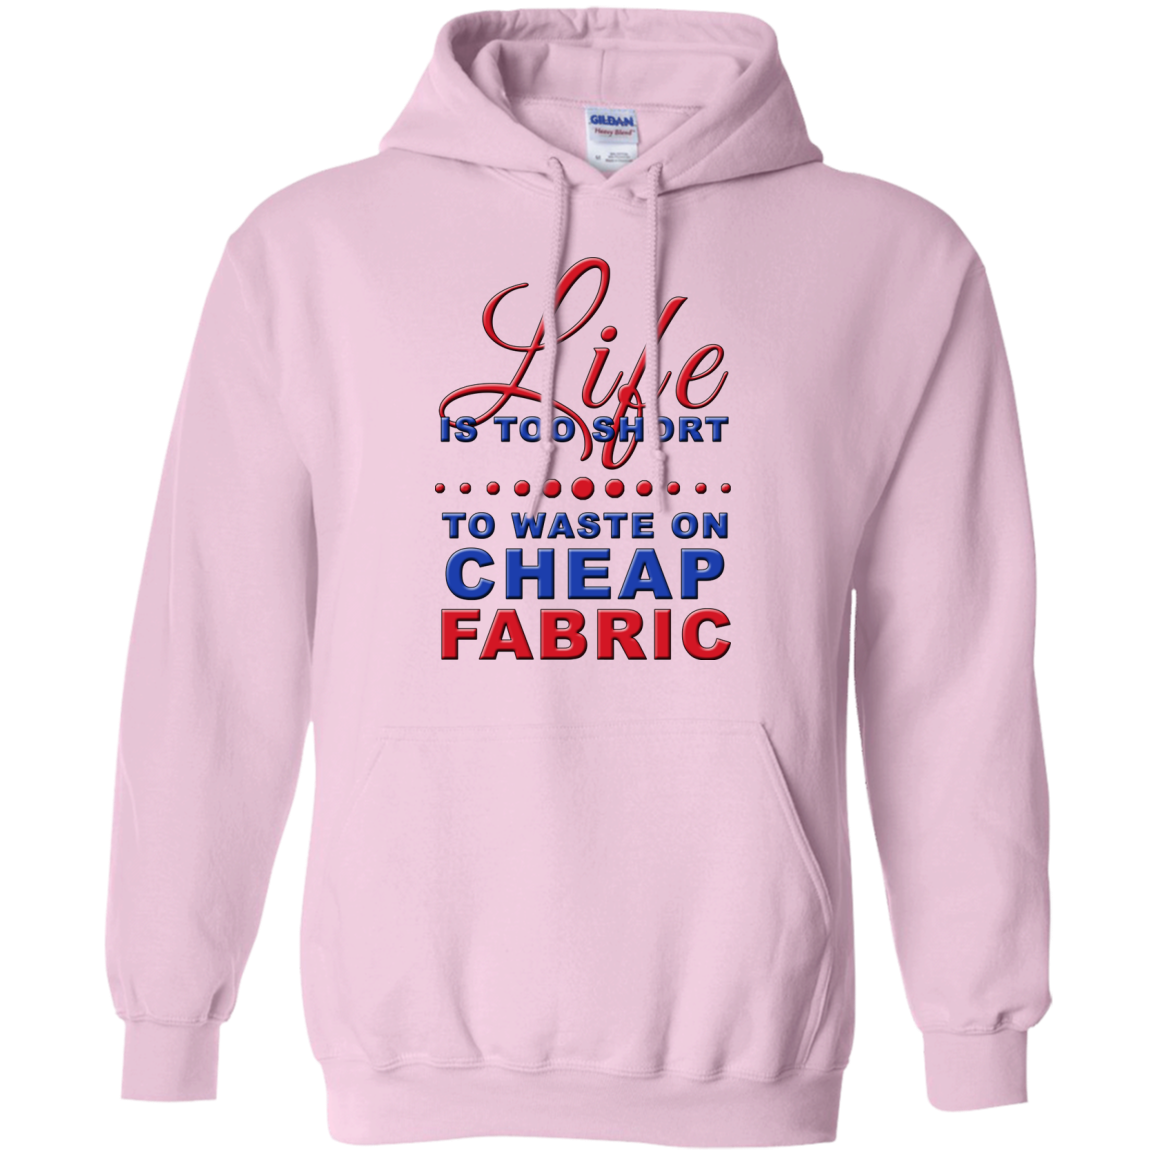 Life is Too Short to Use Cheap Fabric Pullover Hoodies - Crafter4Life - 7